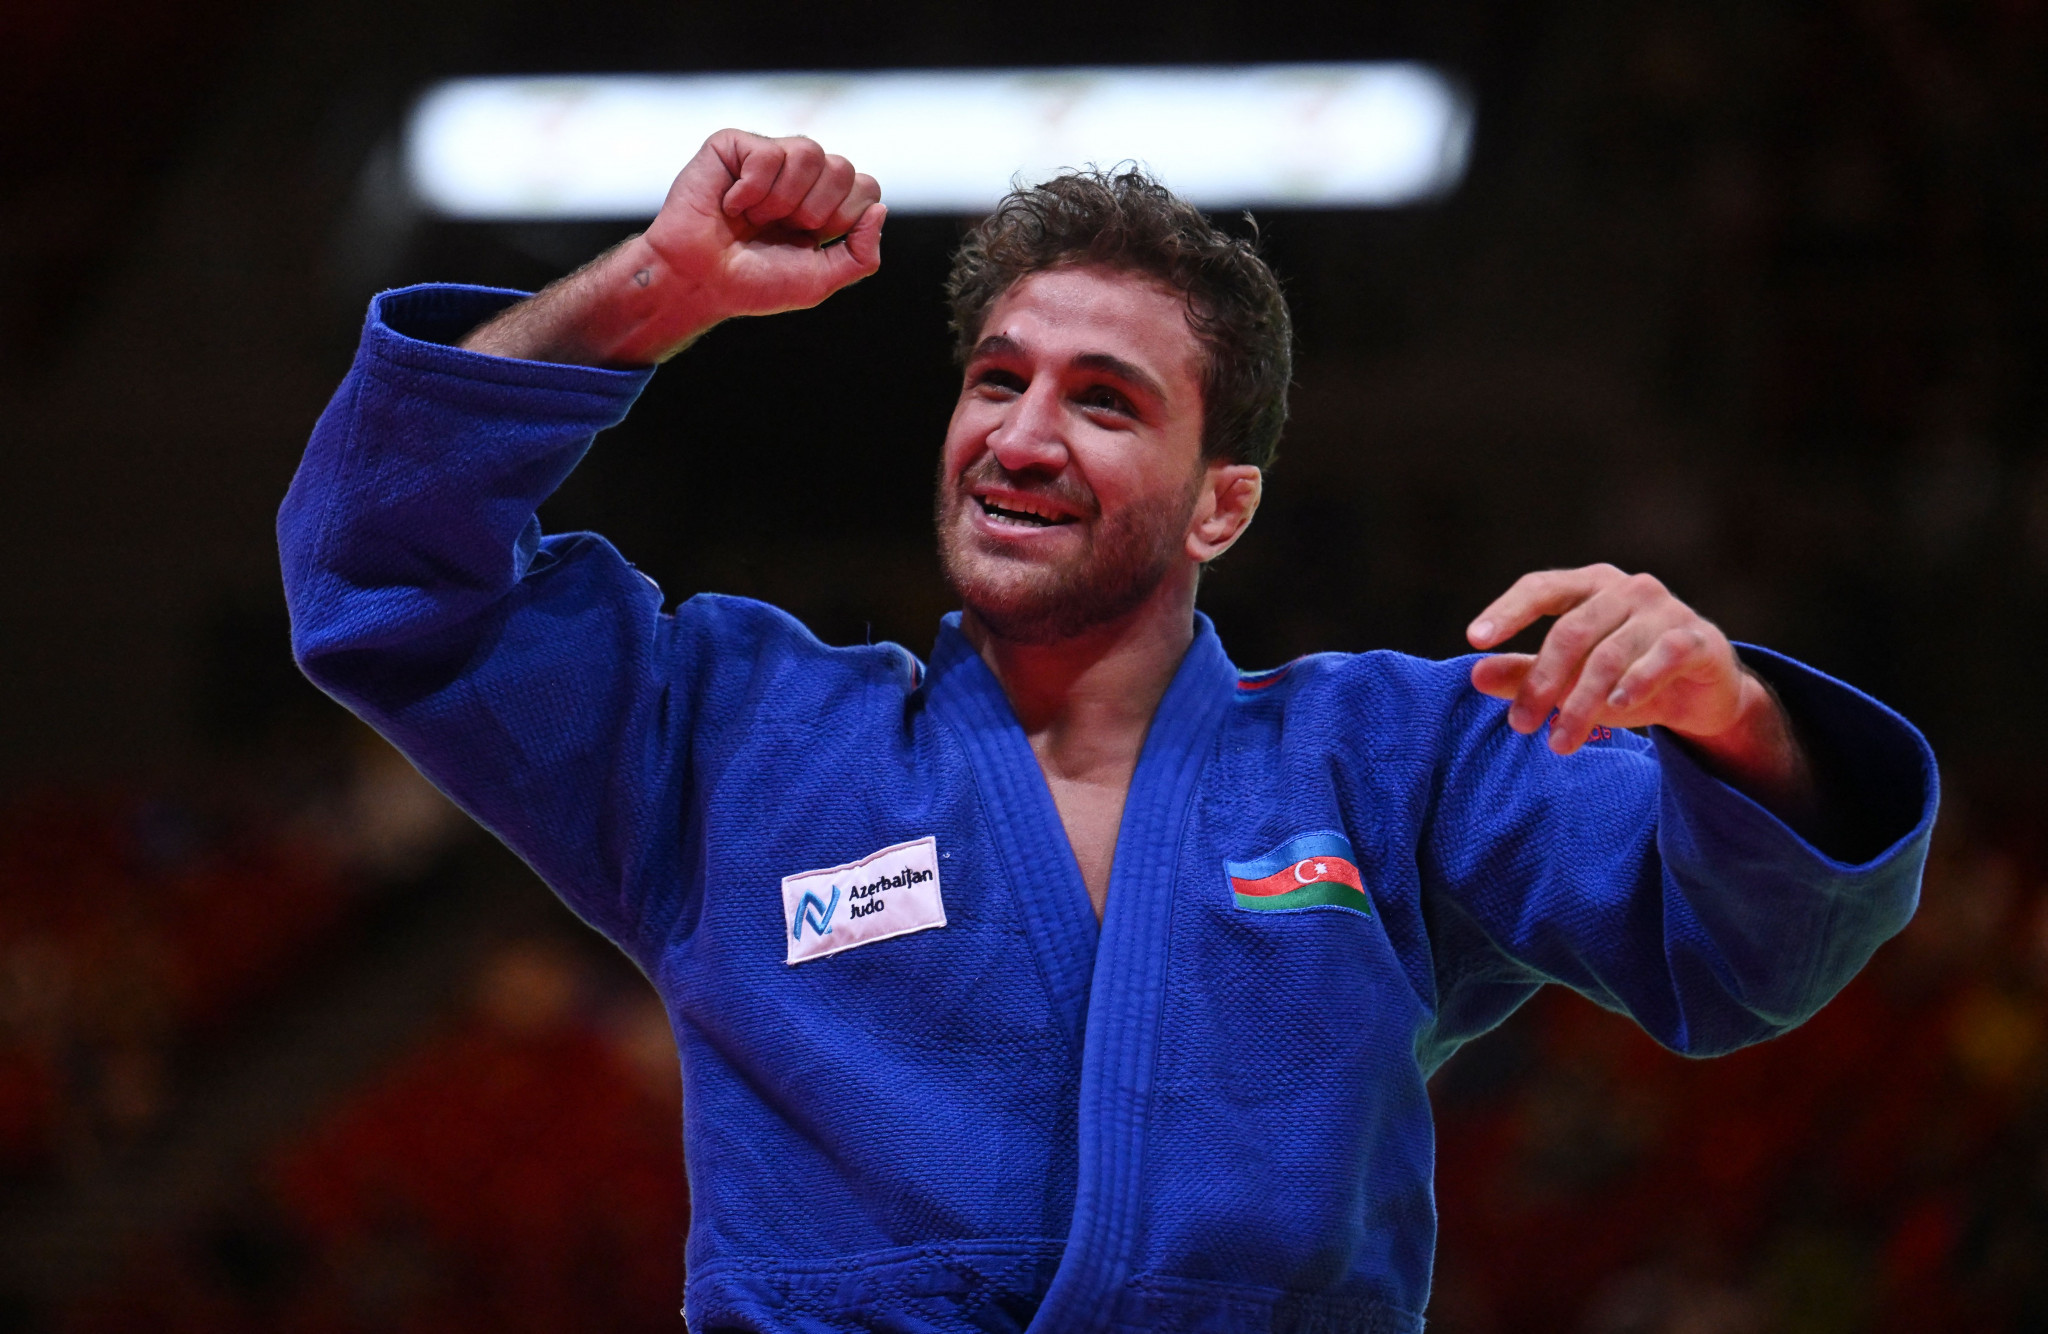 Double joy for Azerbaijan on day two of home IJF Grand Slam